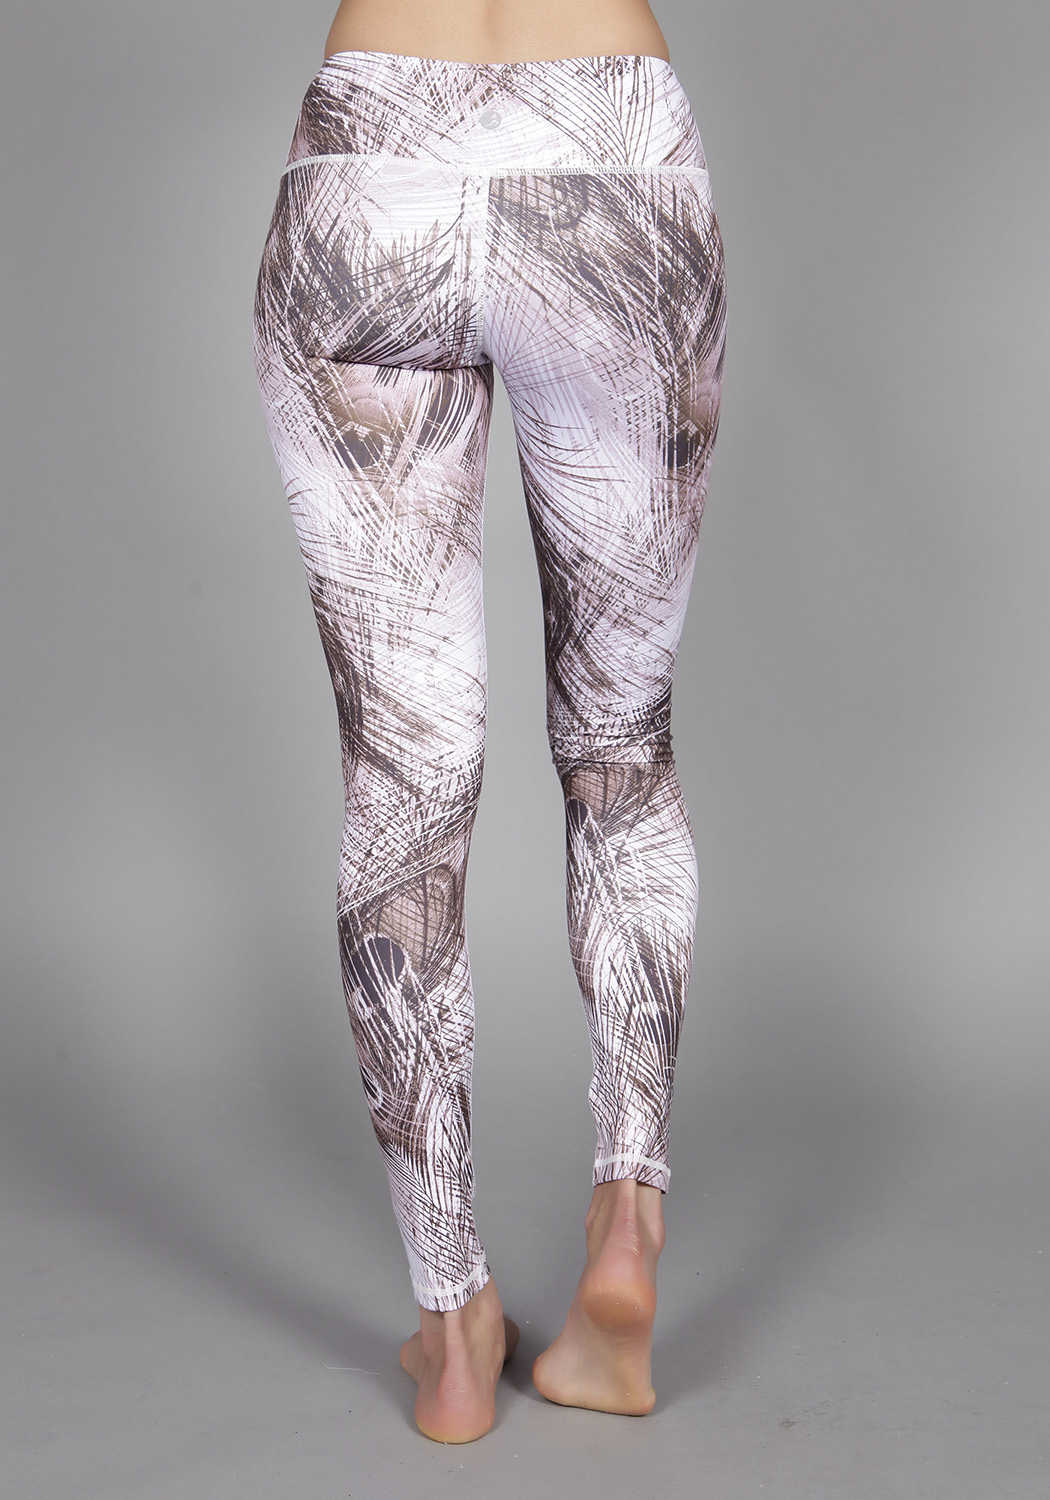 Stretchy White and Brown Patterned Leggings – Marble White – Bodhi Me